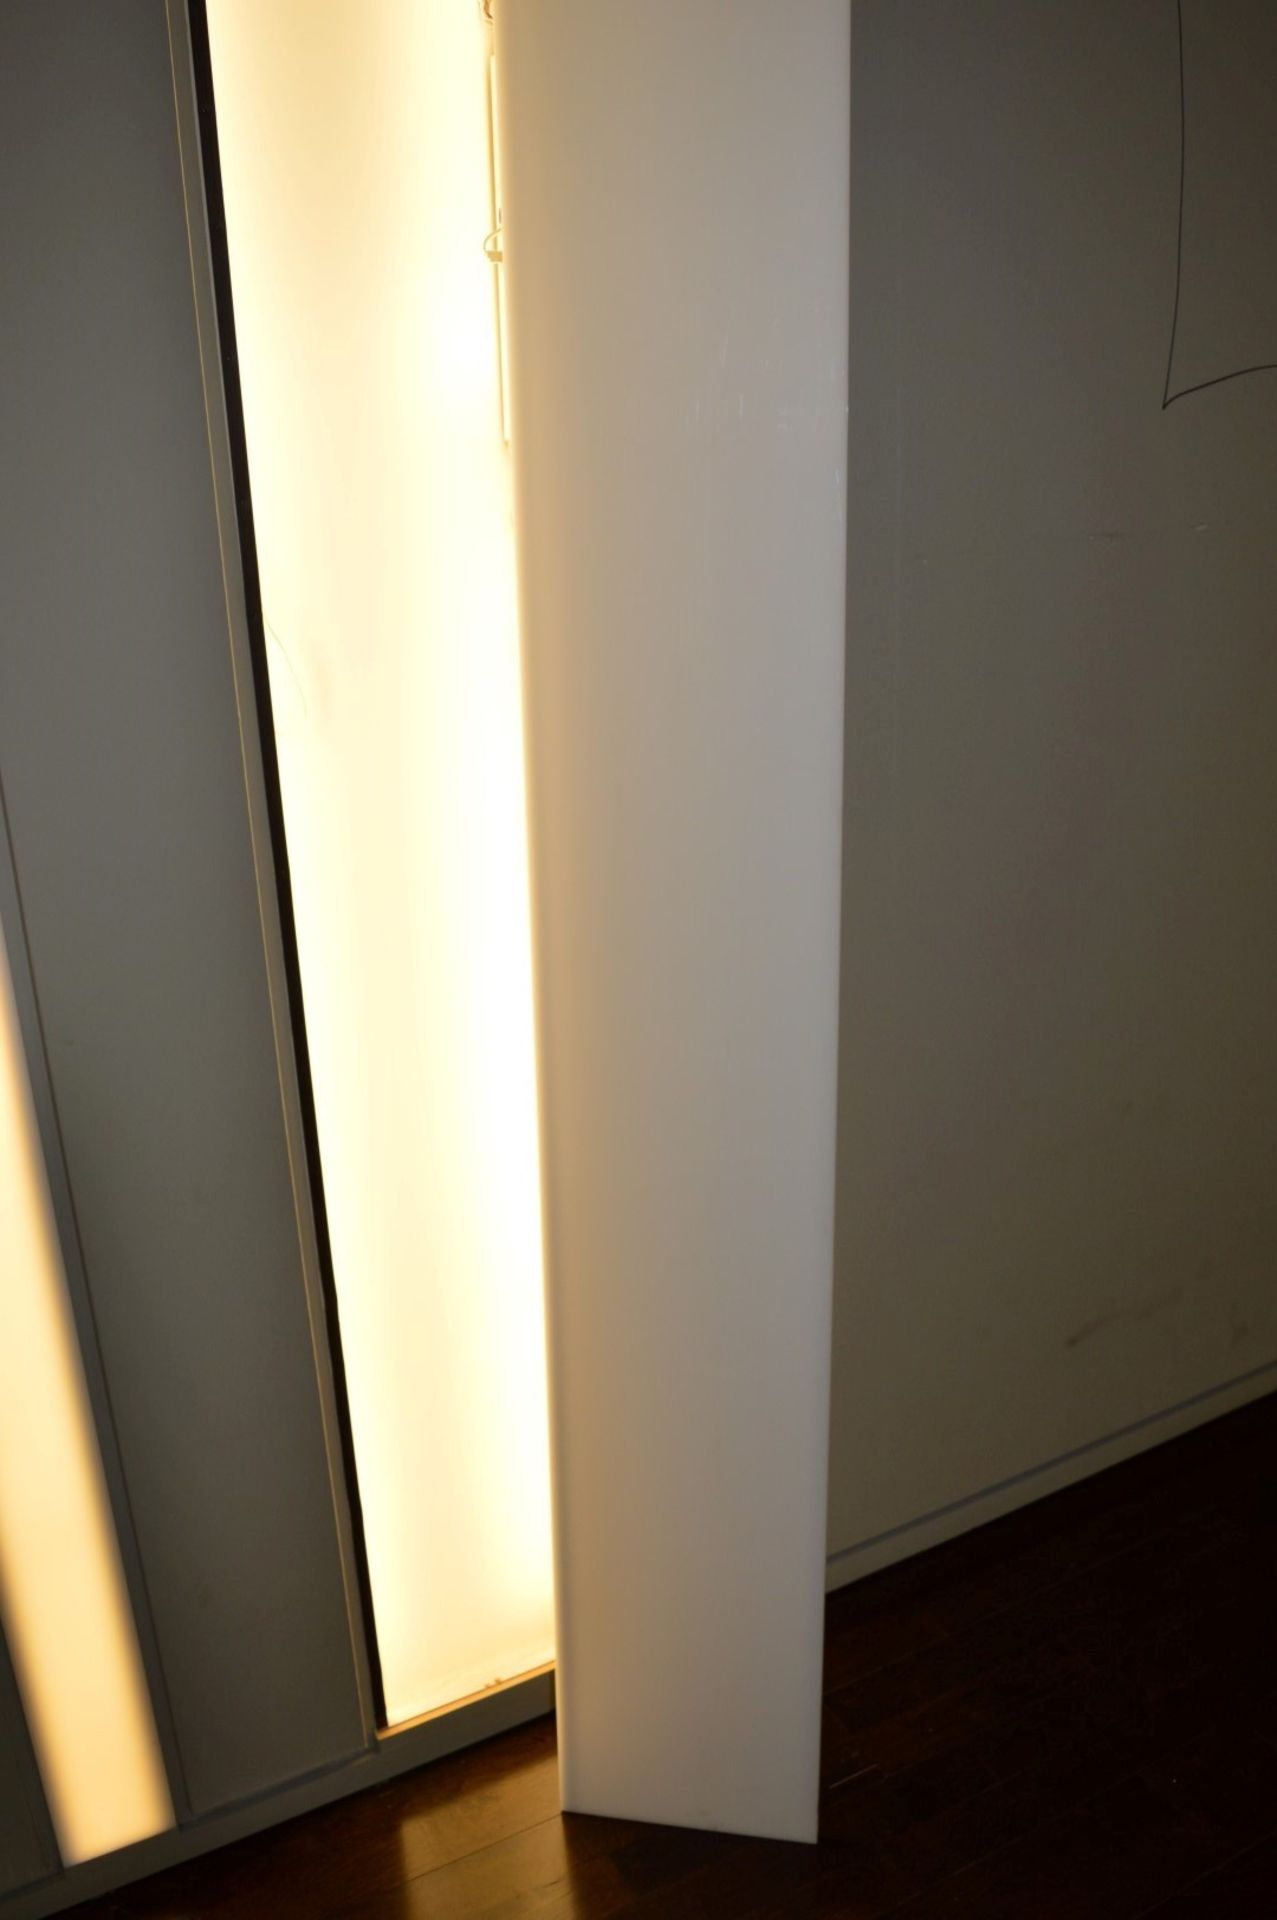 17 x Recessed Wall Light Fittings - Includes 34 x Tridonic Ballasts, Approx 68 x Tube Lights and - Image 4 of 15